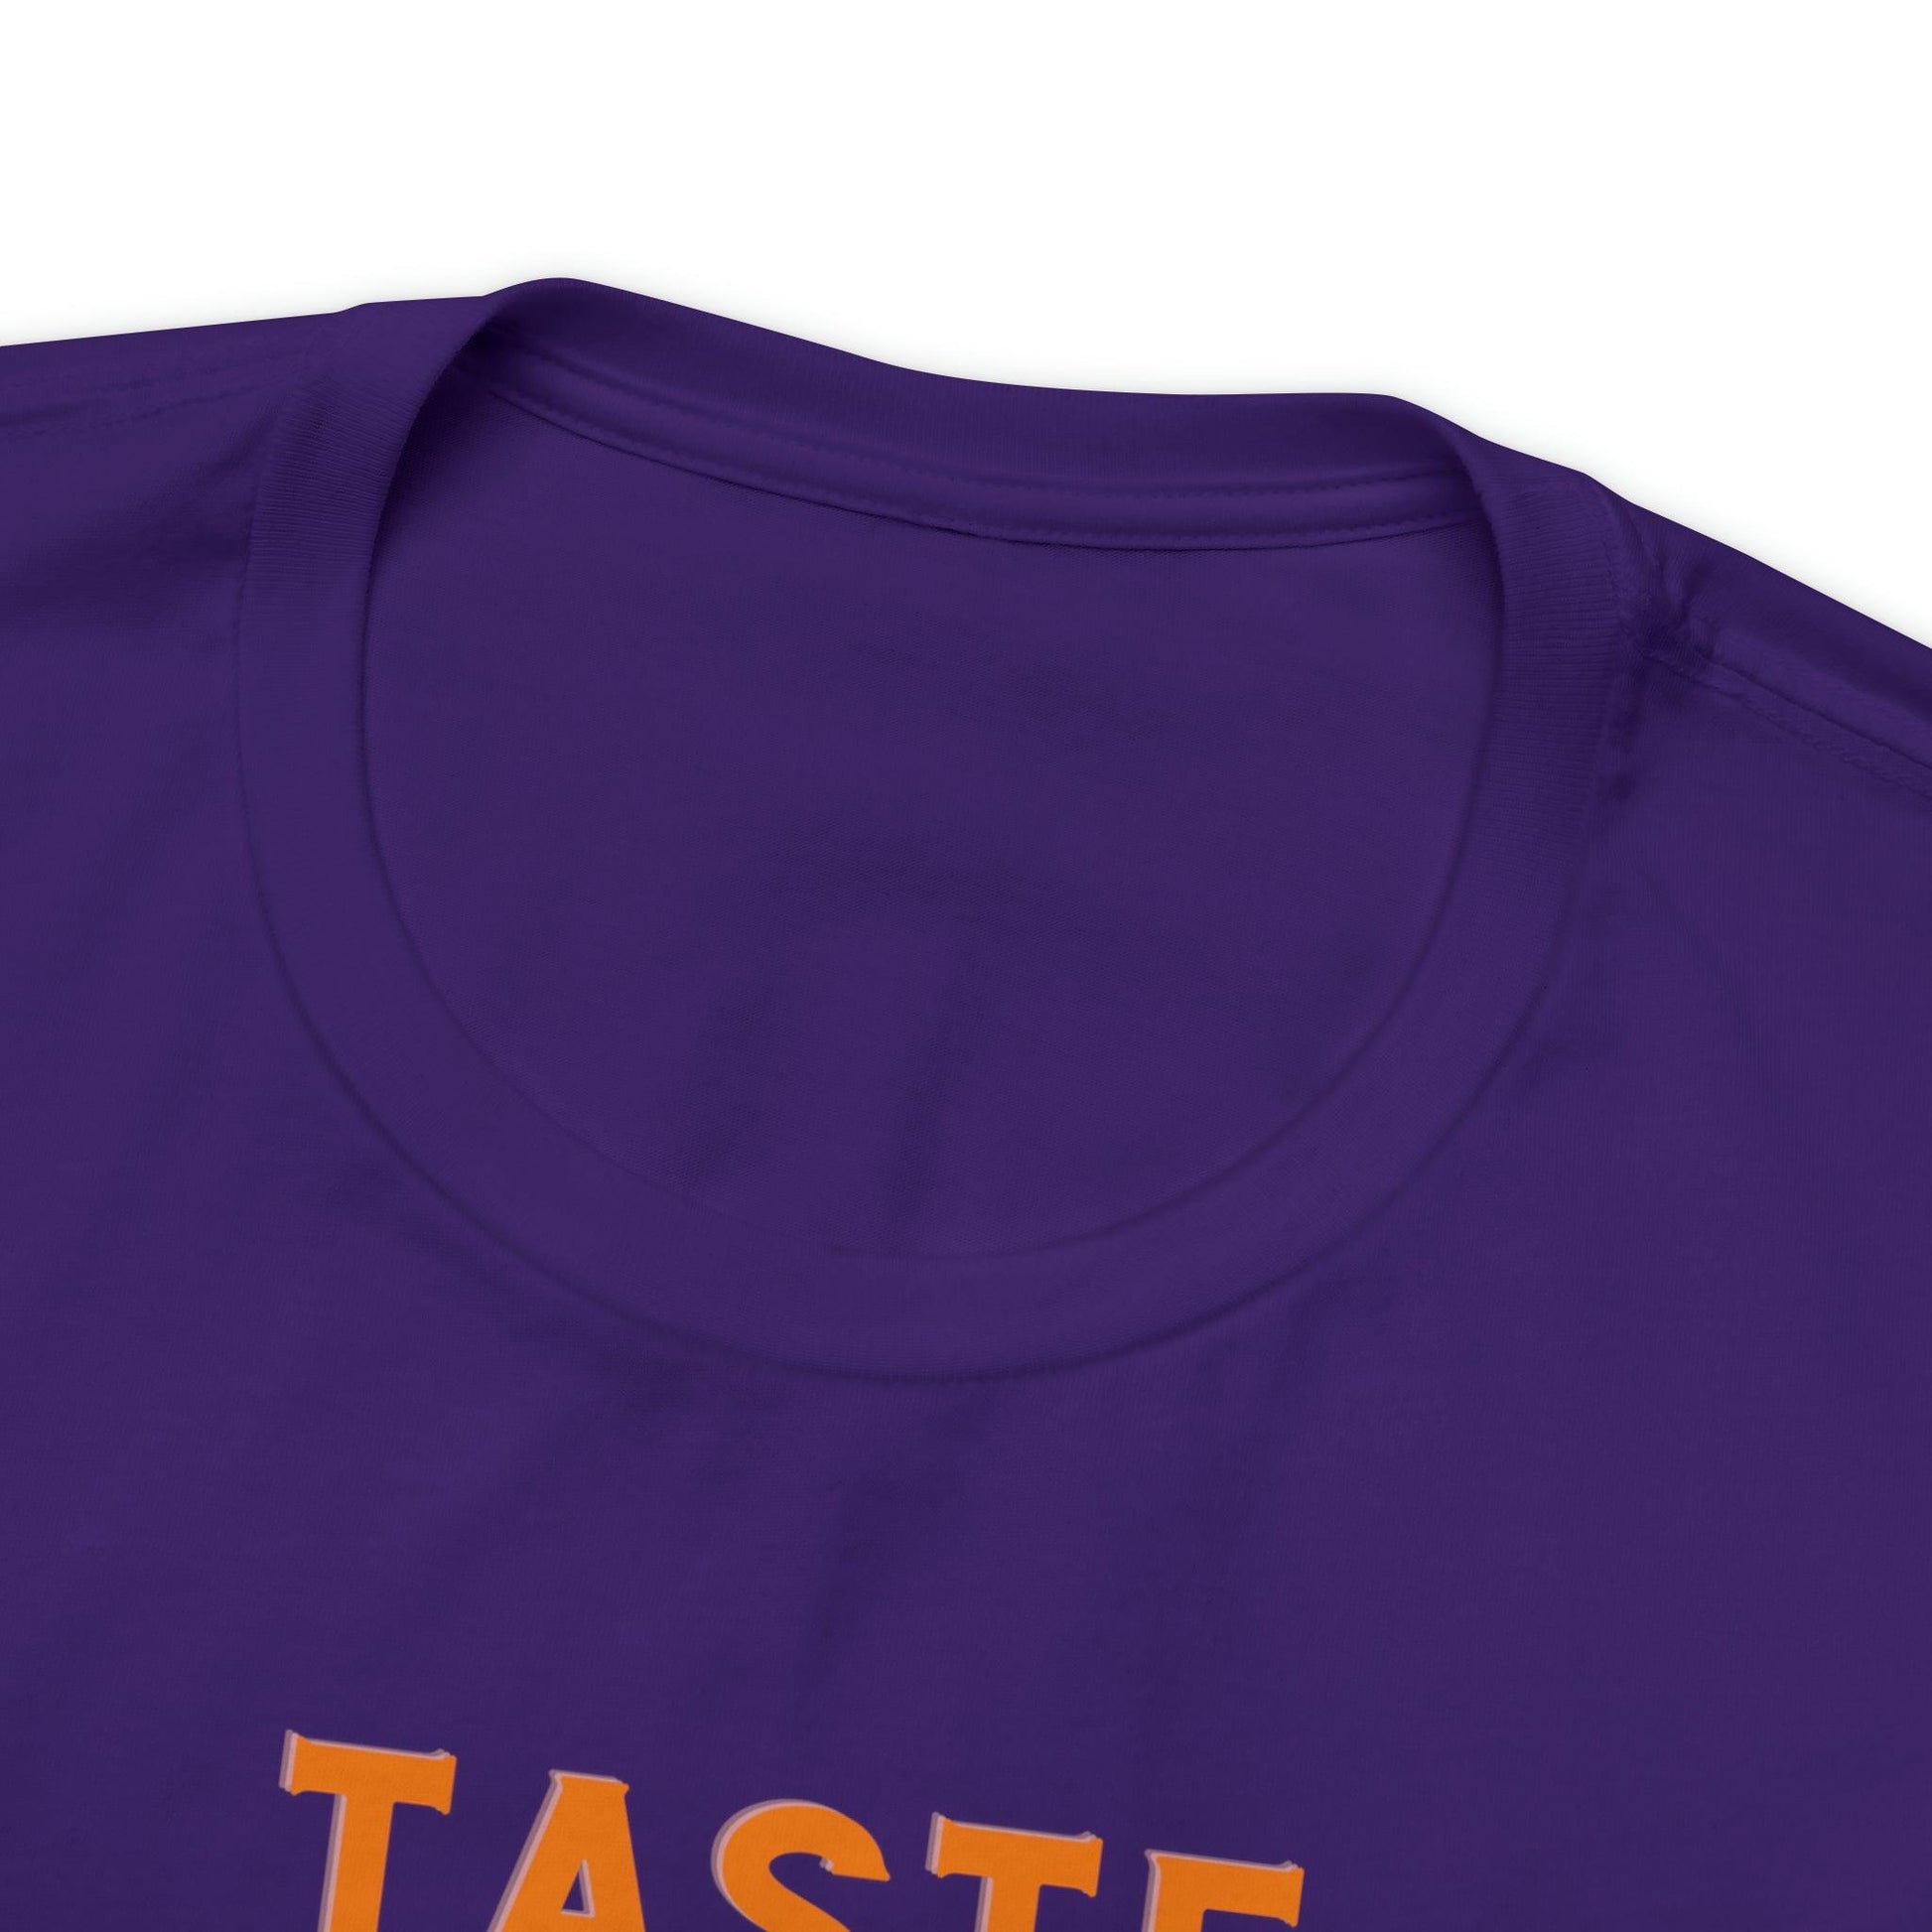 Taste the Biscuit - Wicked Naughty Apparel